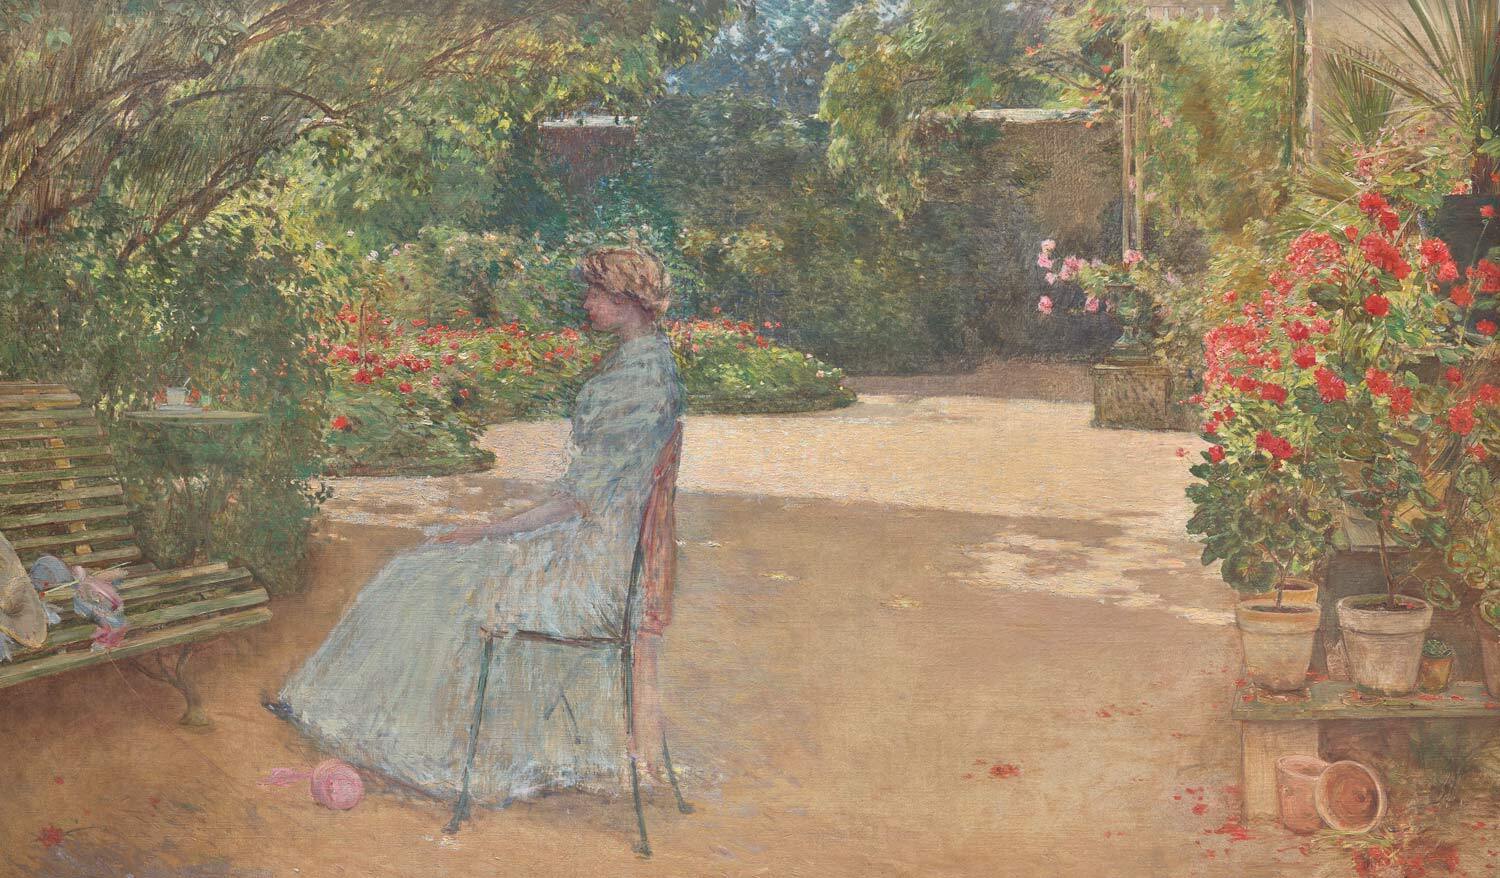 The Most Significant Canvas from Childe Hassam's Parisian Period